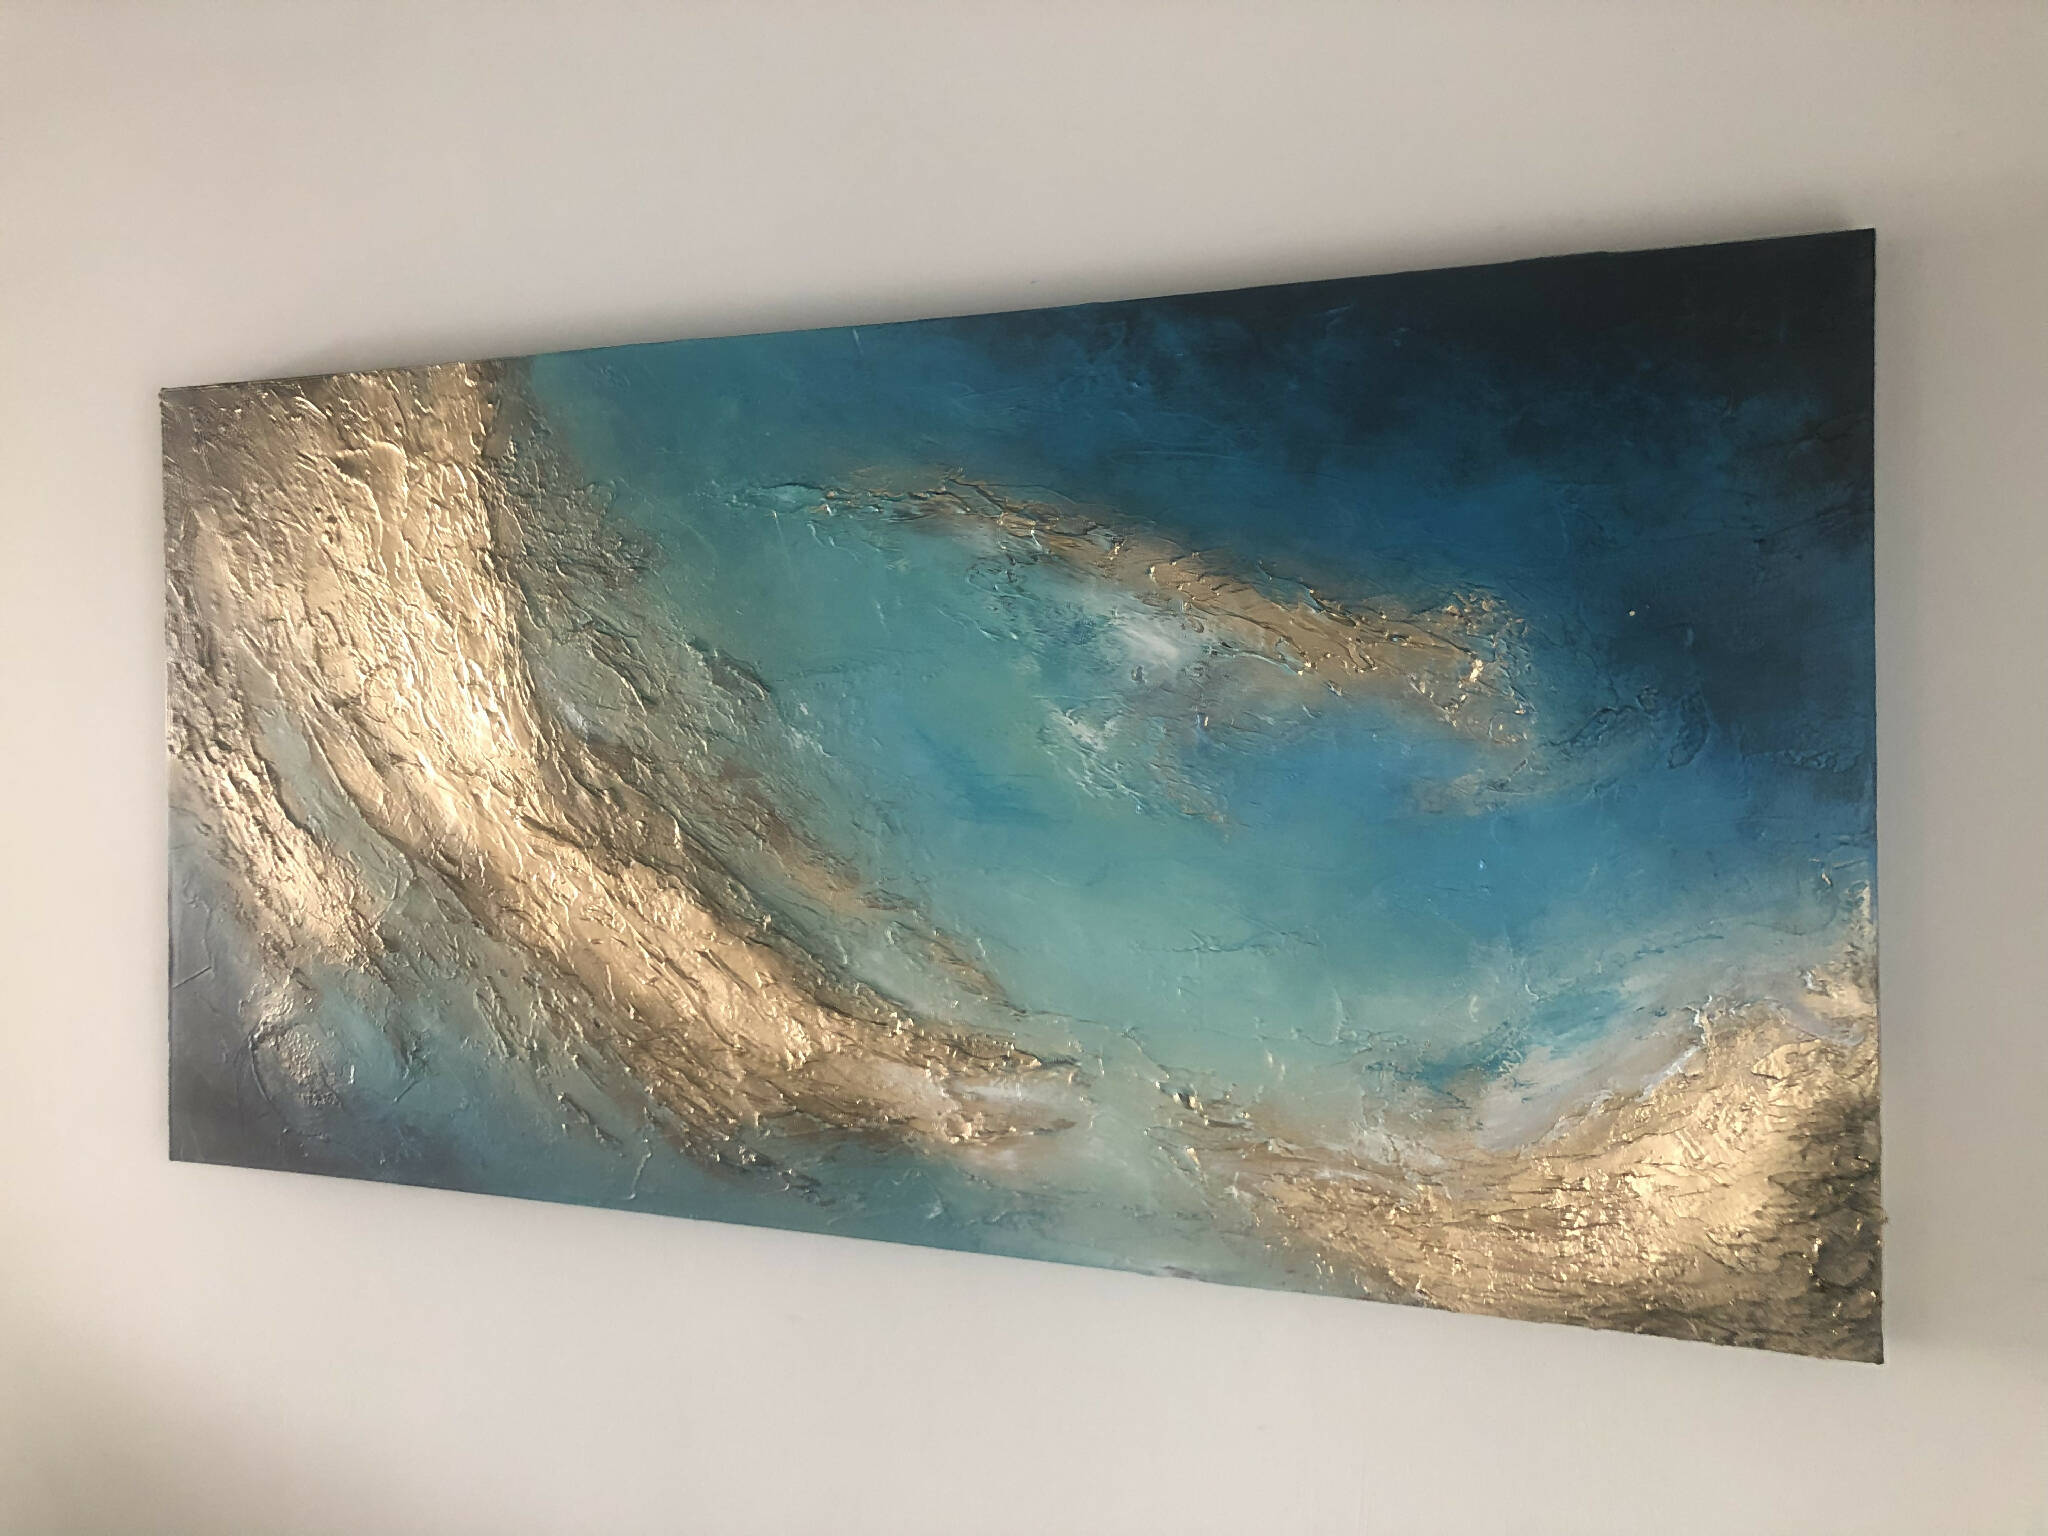 ISTHMUS - Beautiful textured art canvas in shades of jade, blue and gold